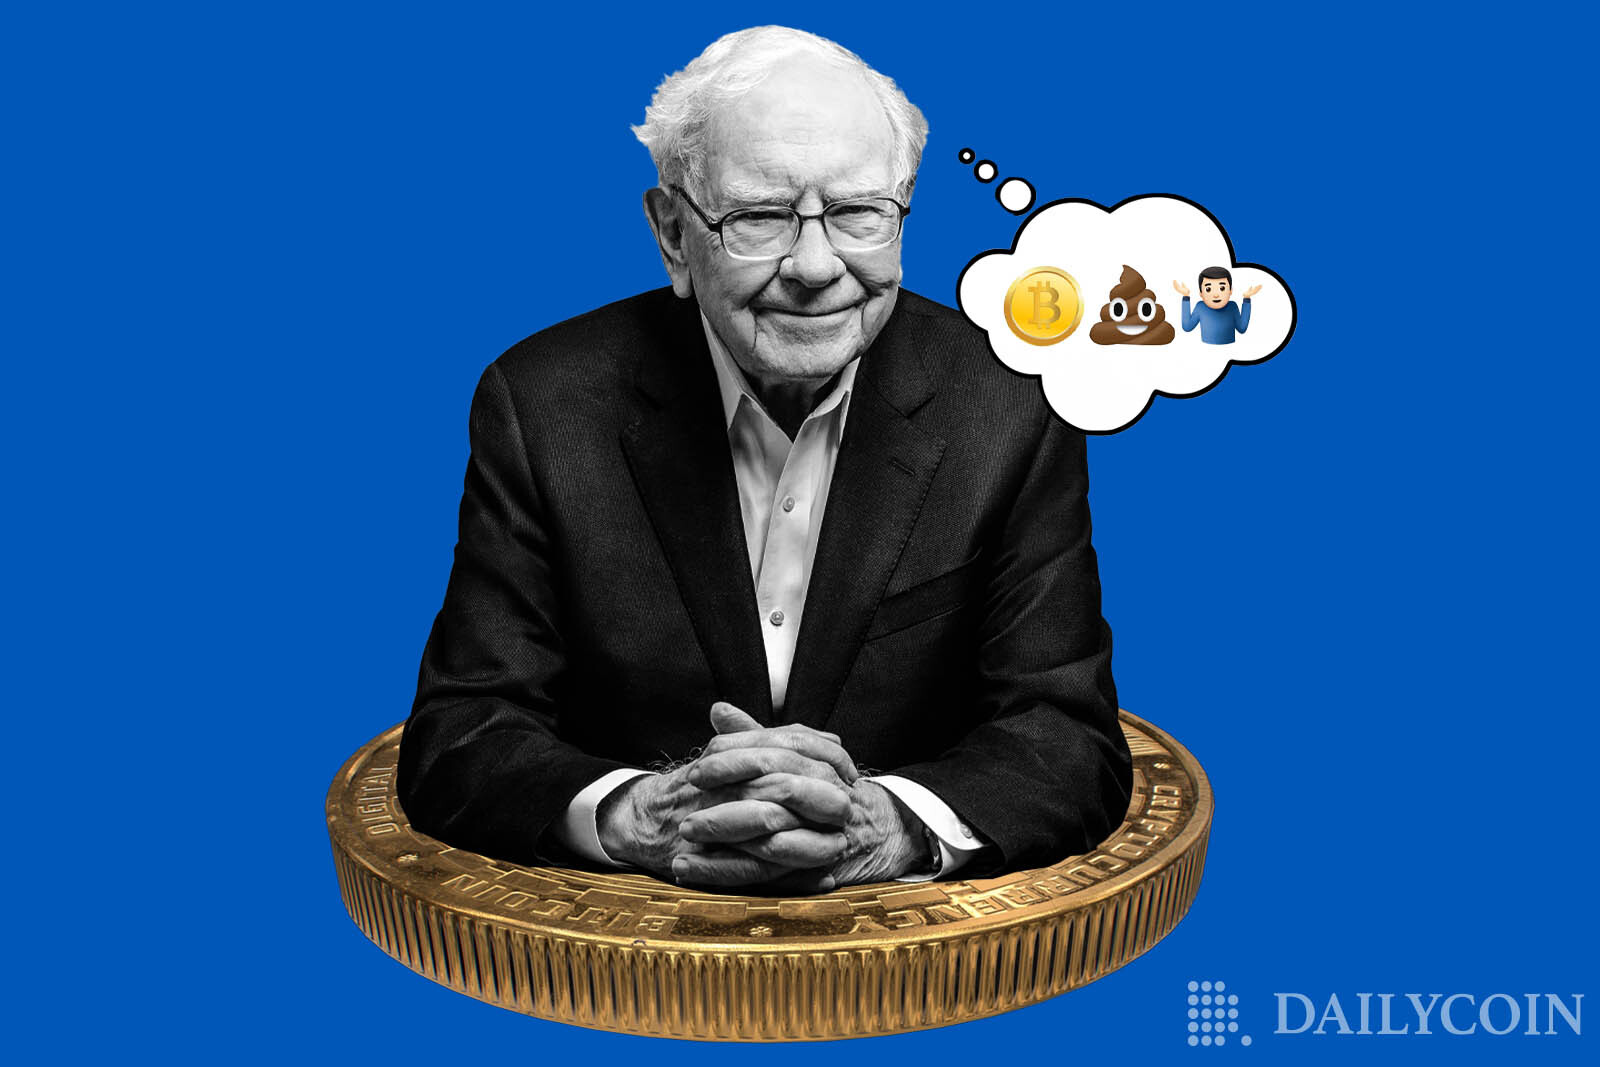 Warren Buffett leaning on a crypto coin and thinking about risky crypto investing.